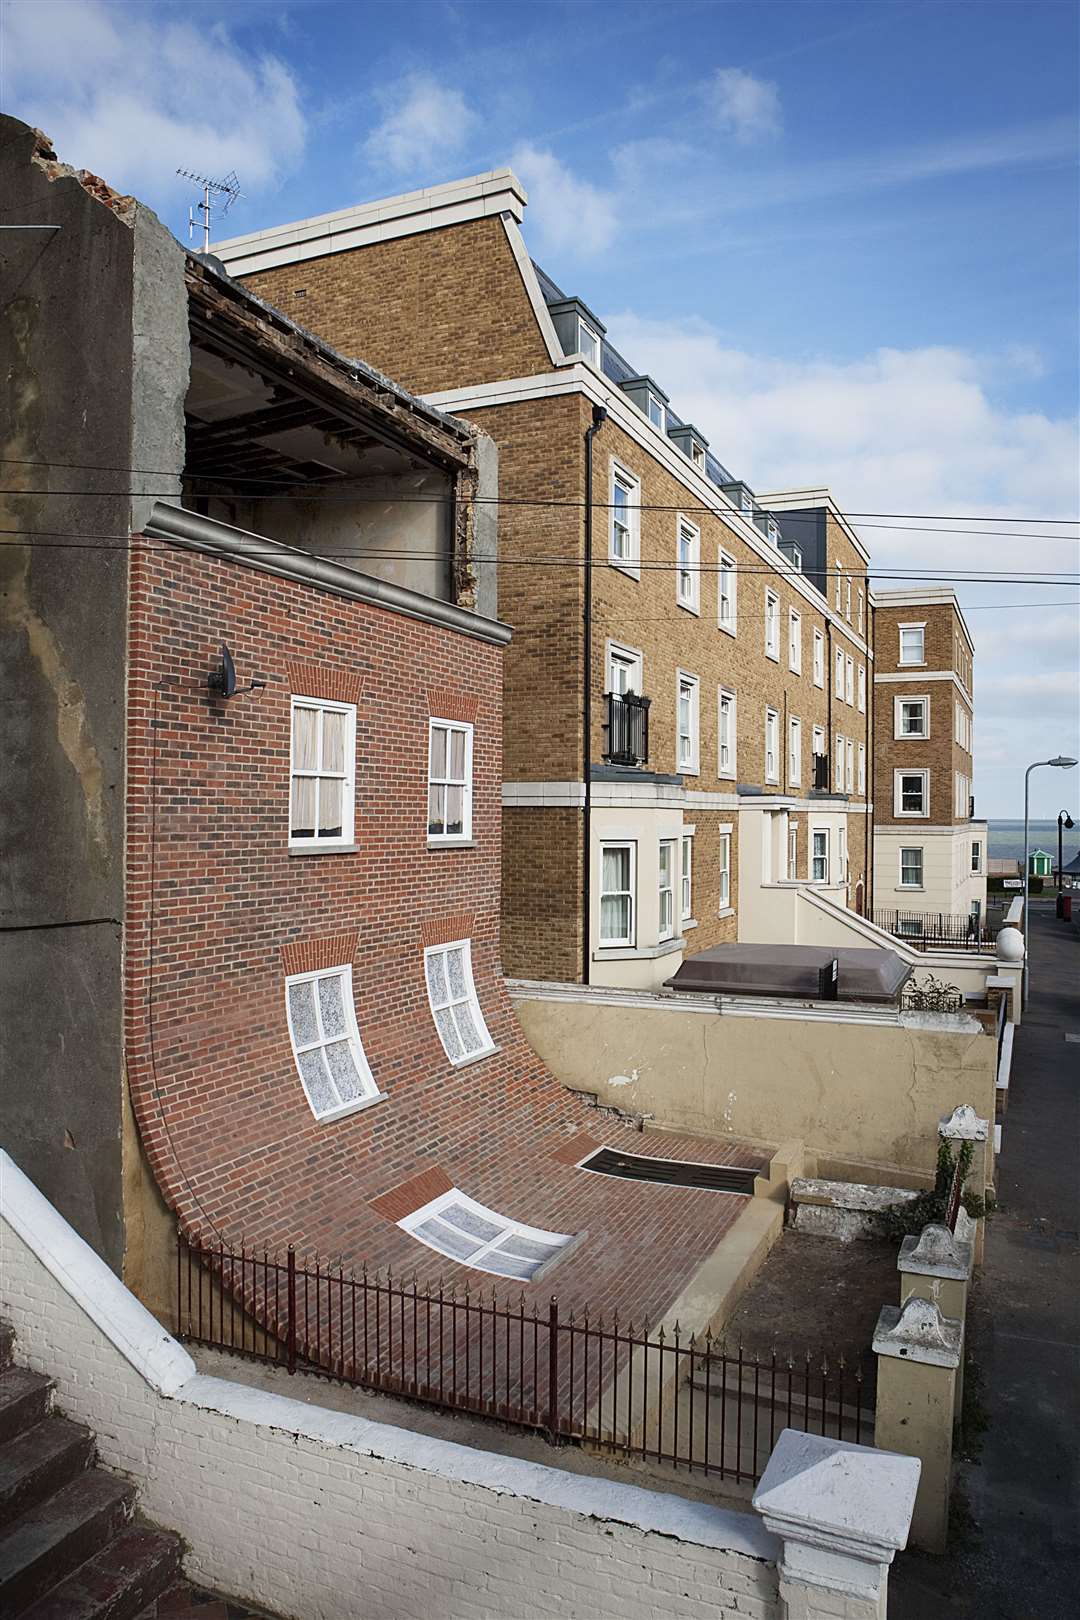 From the Knees of my Nose to the Belly of my Toes. This 2013 work by Alex Chinneck was installed on an empty Margate house - clever, eh?